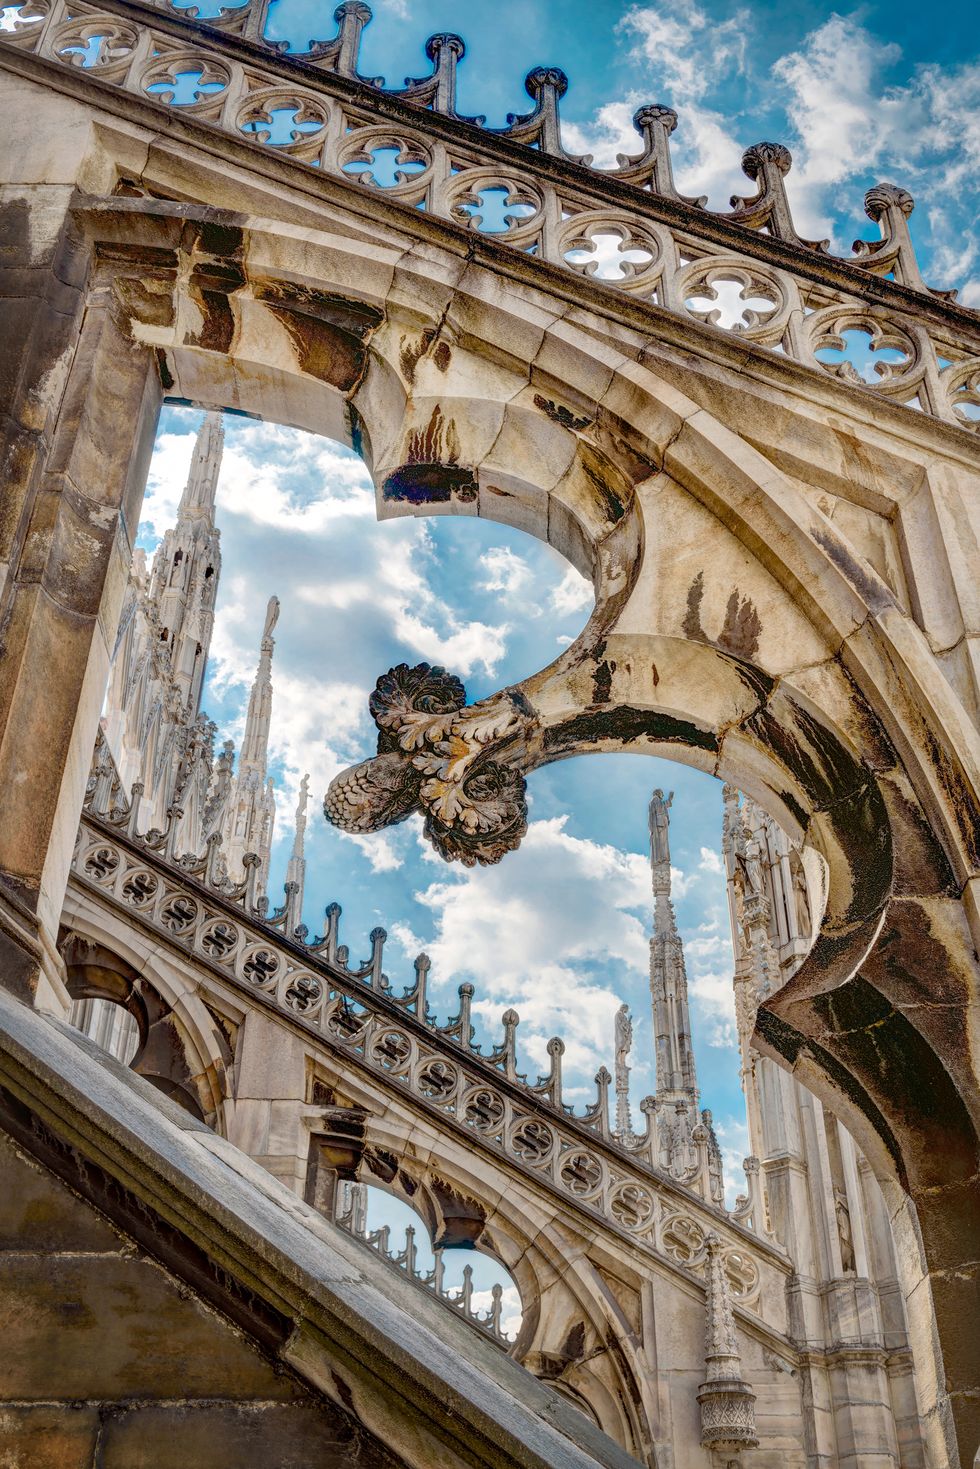 milan cathedral roof, italy luxury architecture detail of ornate gothic rooftop famous old milan cathedral duomo di milano is top tourist attraction of milan close up of luxury carved exterior shutterstock id 678687970 purchaseorder job client other